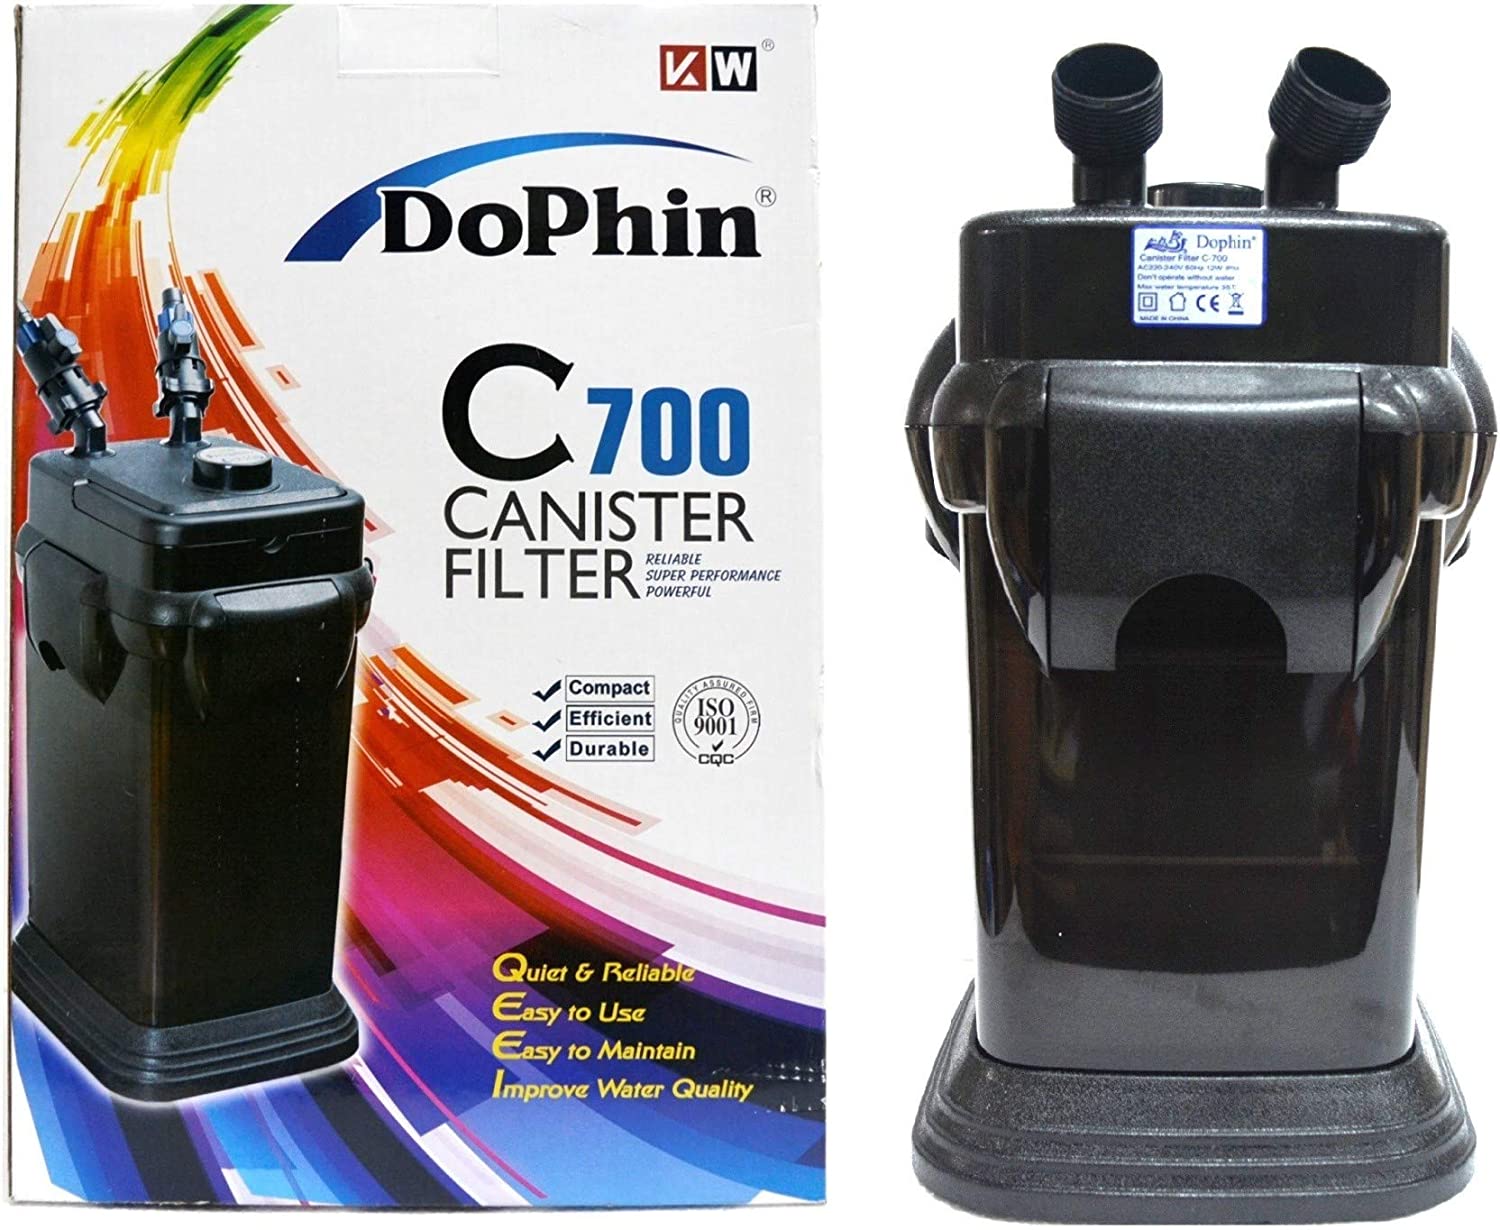 Dolphin Canister Filter